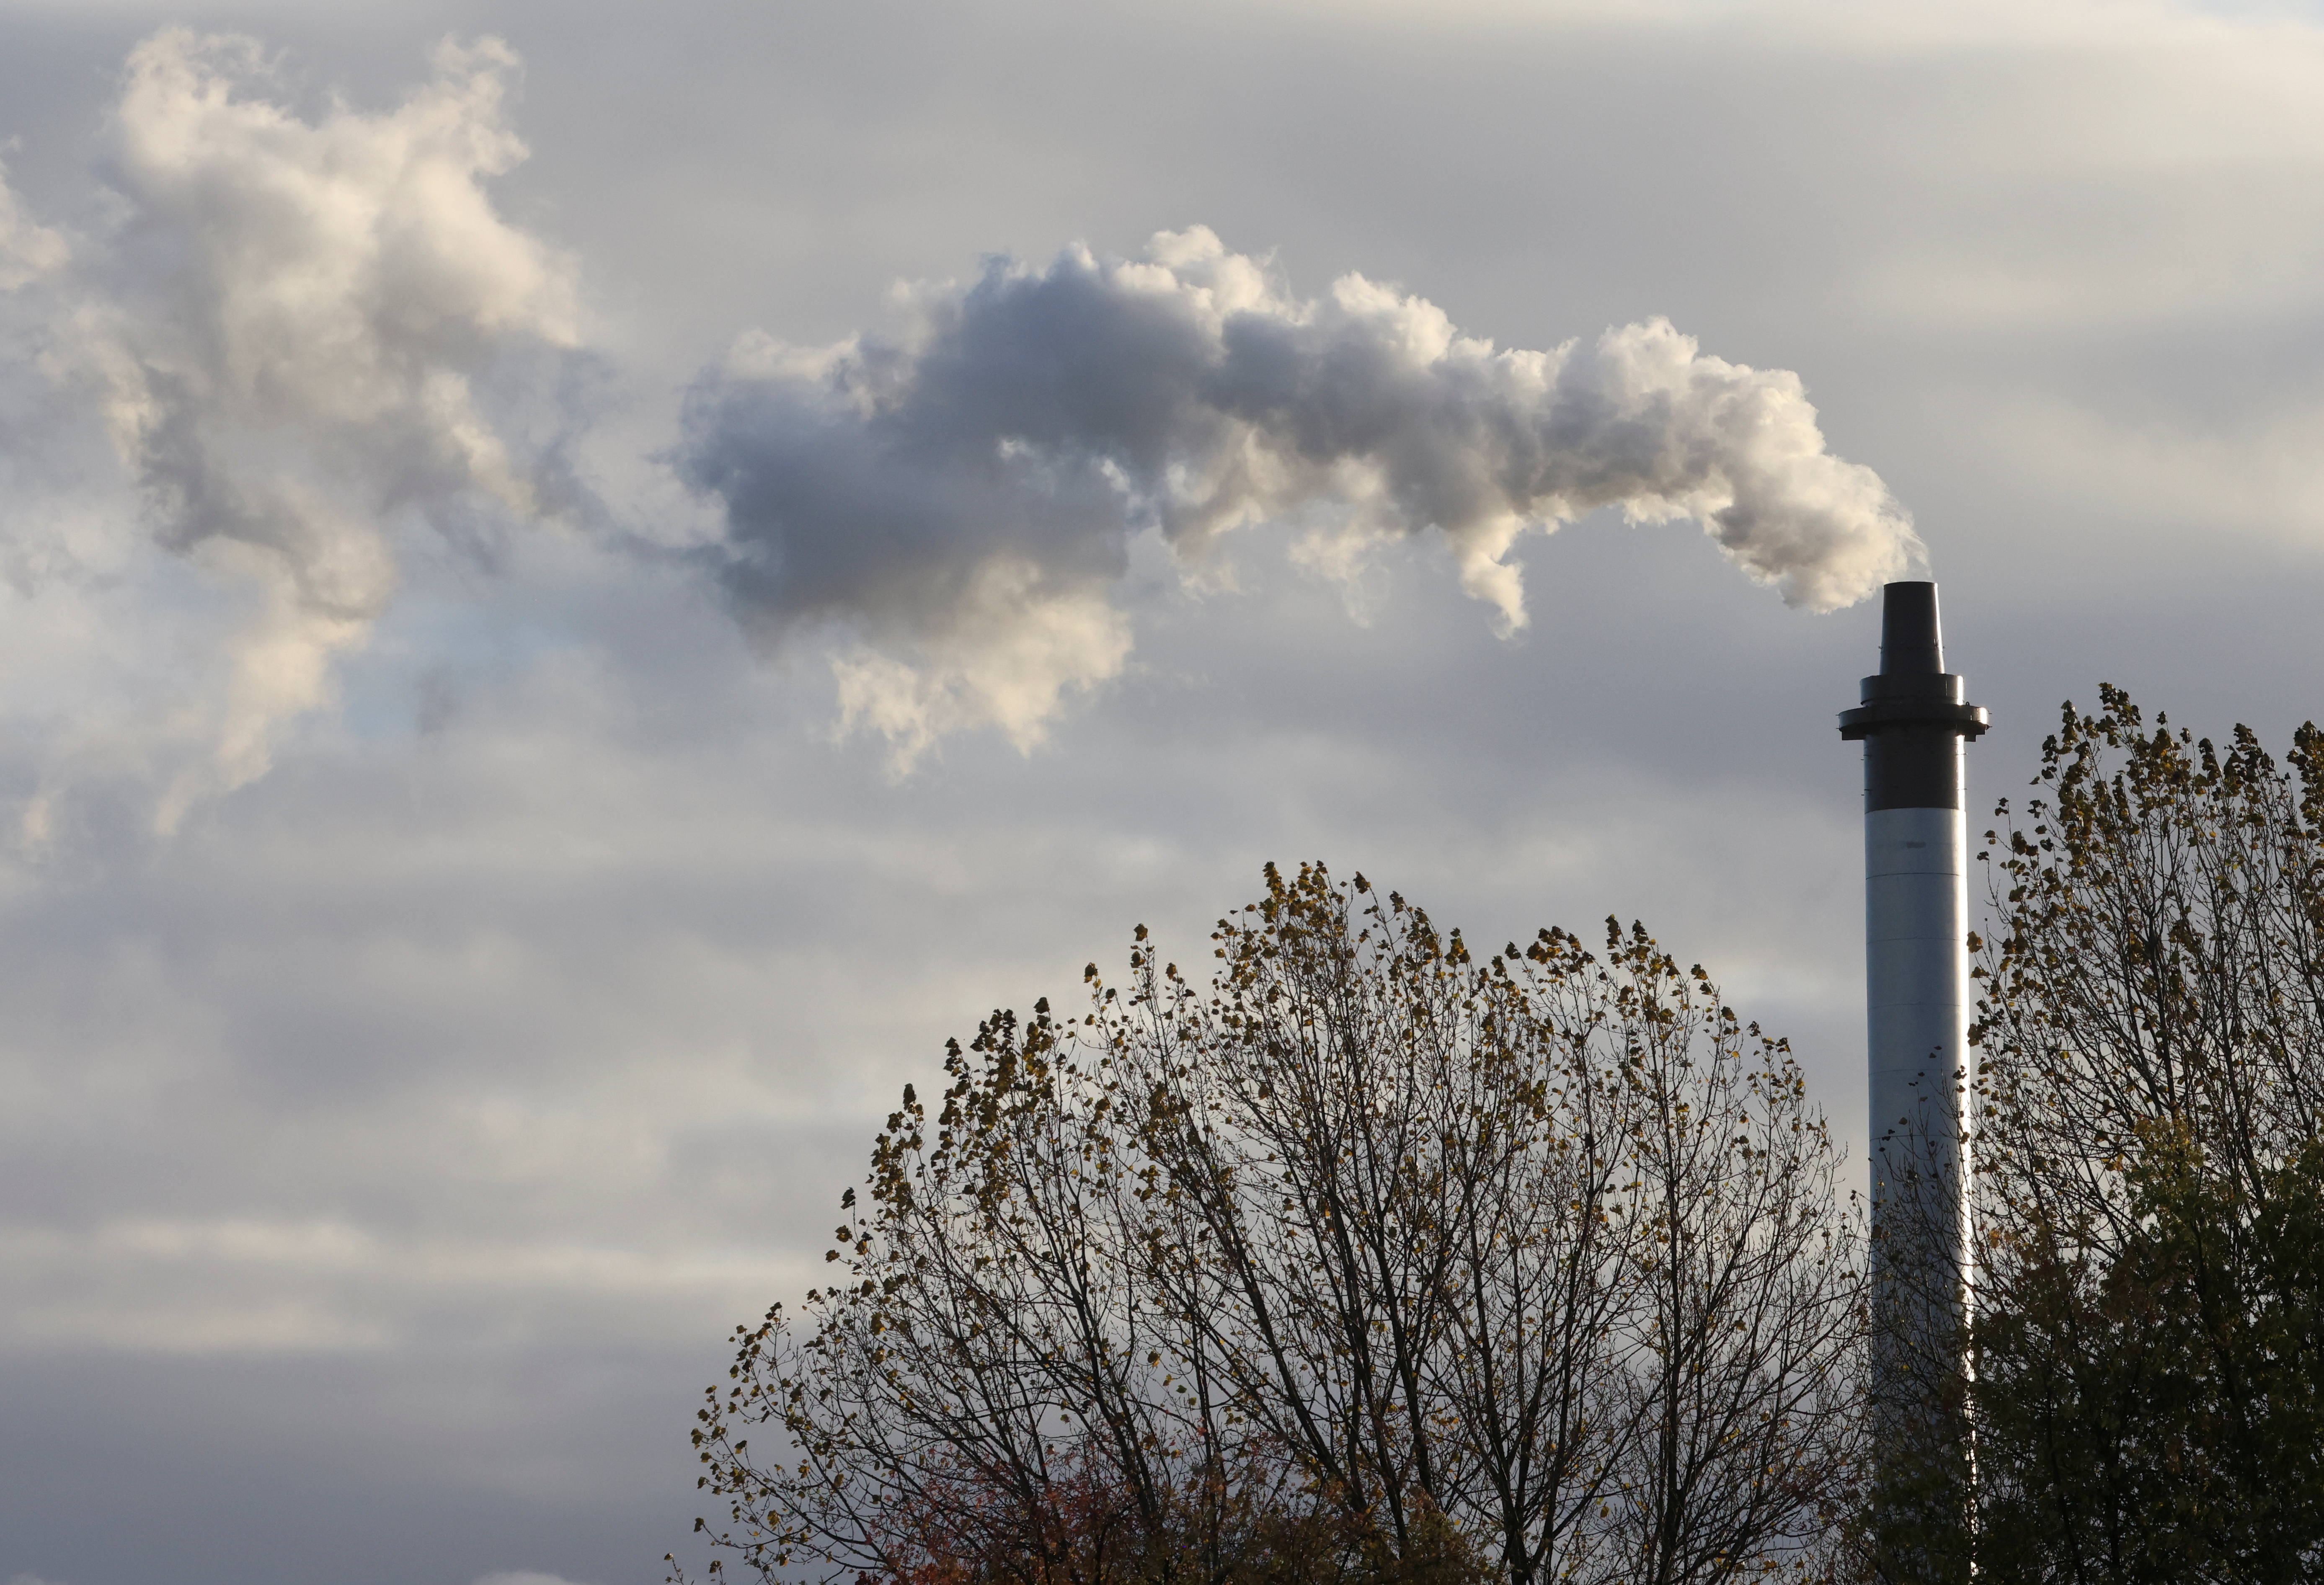 A smoke billowing from a chimney is pictured, as the UN Climate Change Conference (COP26) takes place, in Glasgow, Scotland, Britain, November 6, 2021. REUTERS/Yves Herman